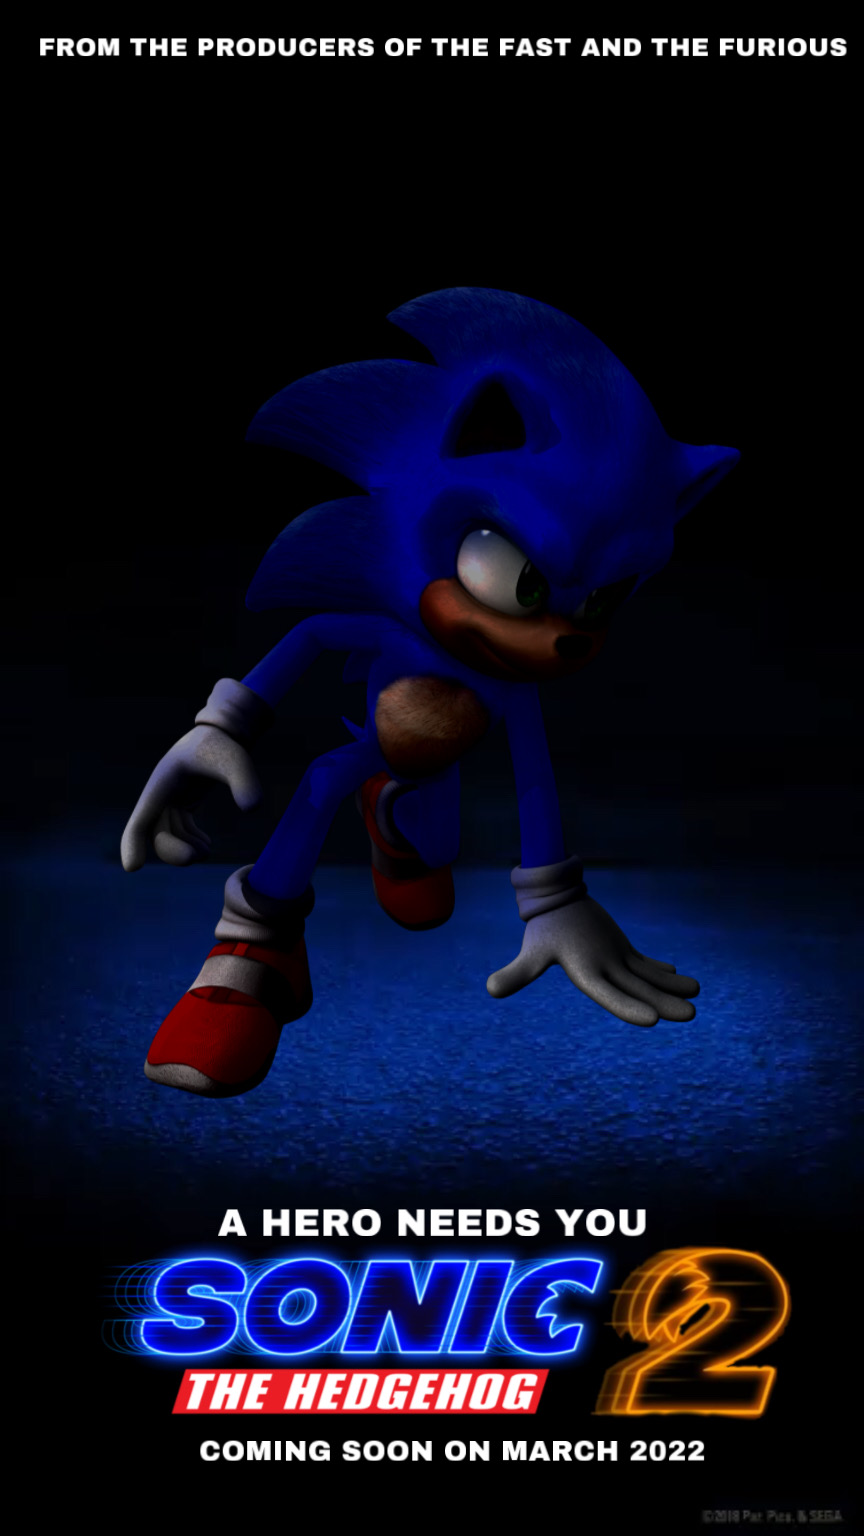 The Most Edited #sonic the hedgehog | PicsArt